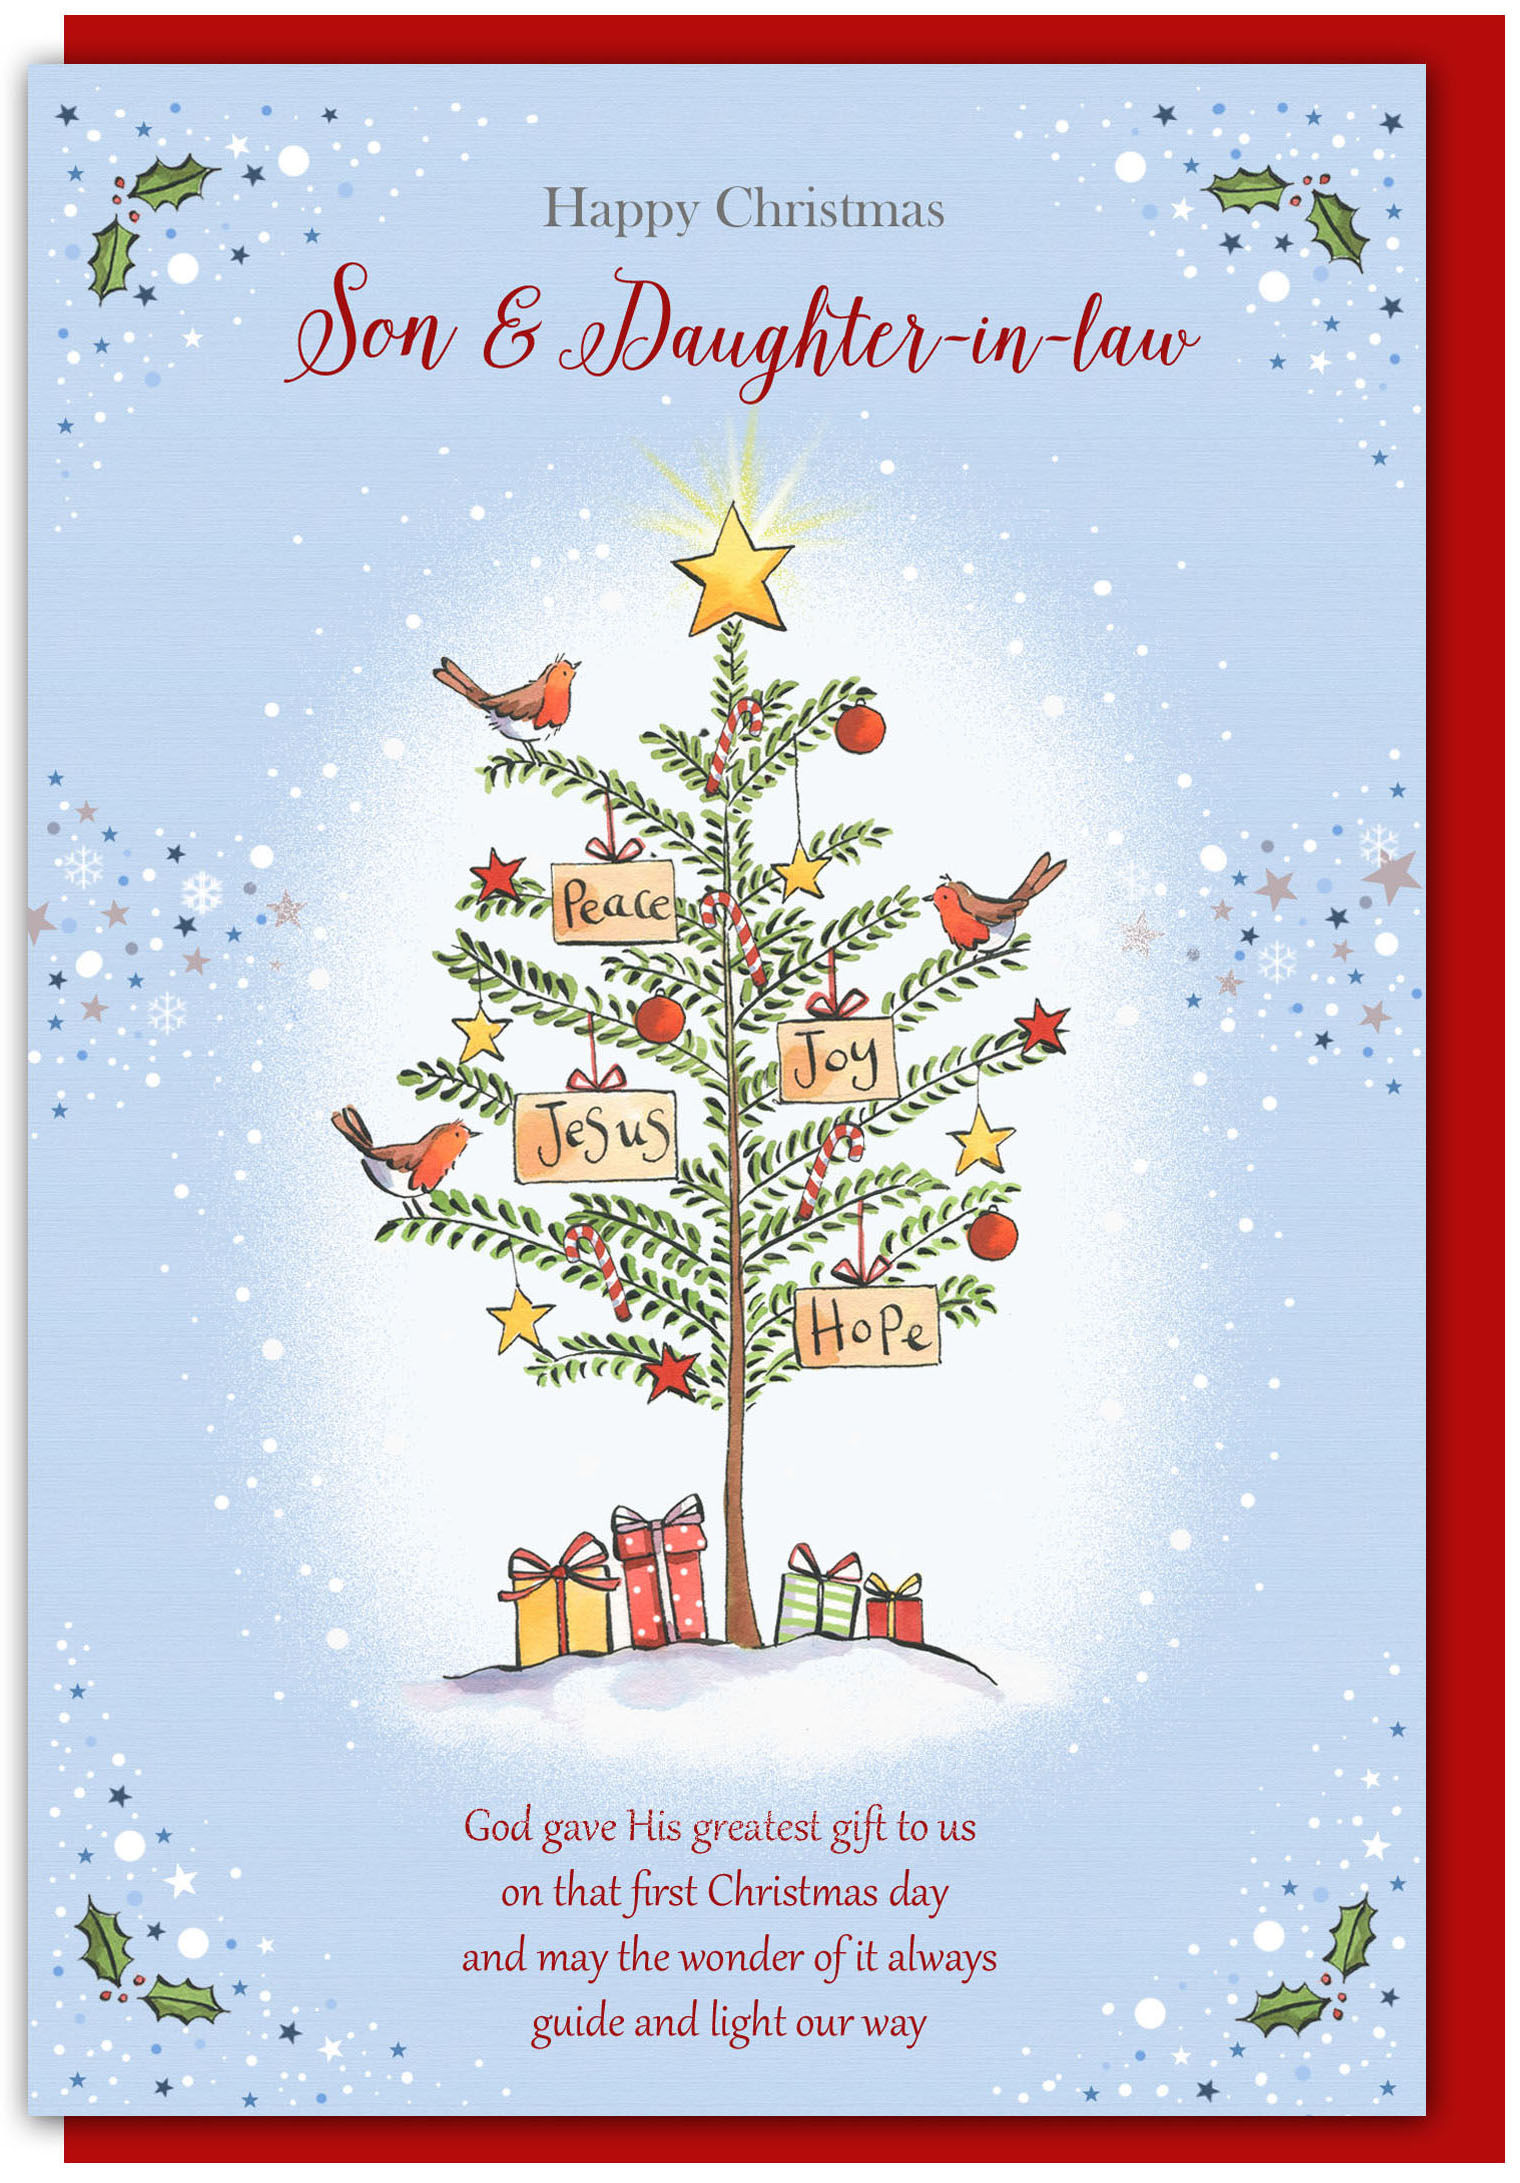 Christmas Greetings Daughter In Law 2023 New Top Popular Review of